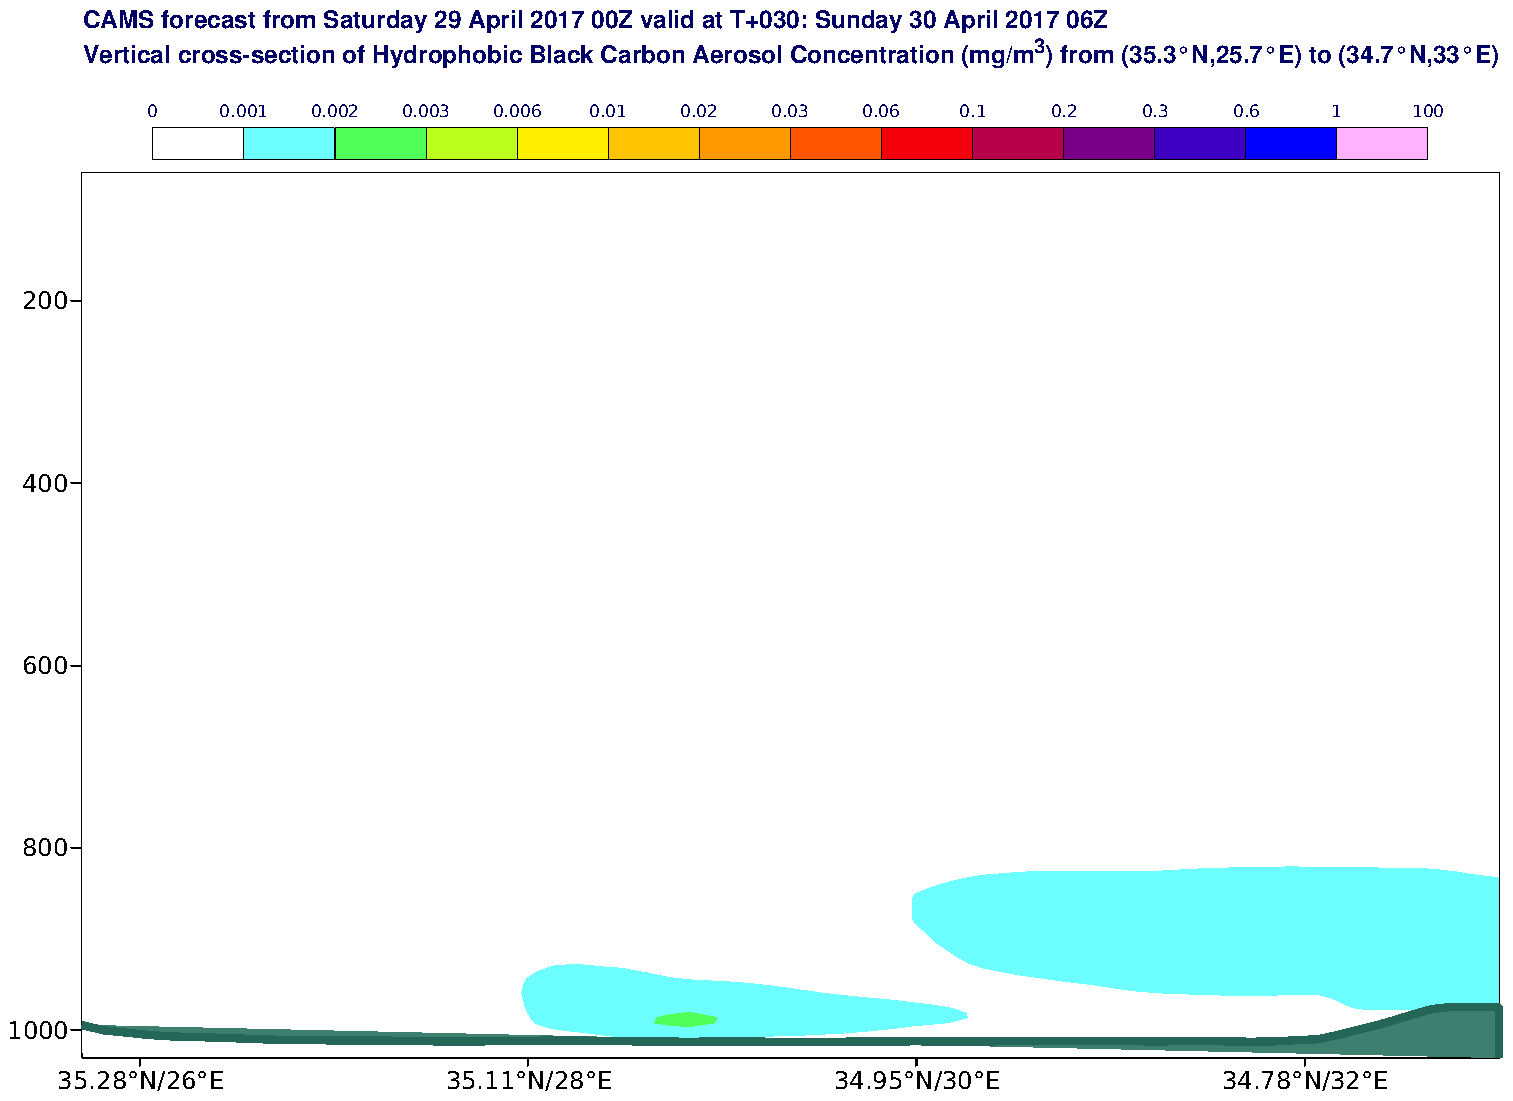 Vertical cross-section of Hydrophobic Black Carbon Aerosol Concentration (mg/m3) valid at T30 - 2017-04-30 06:00